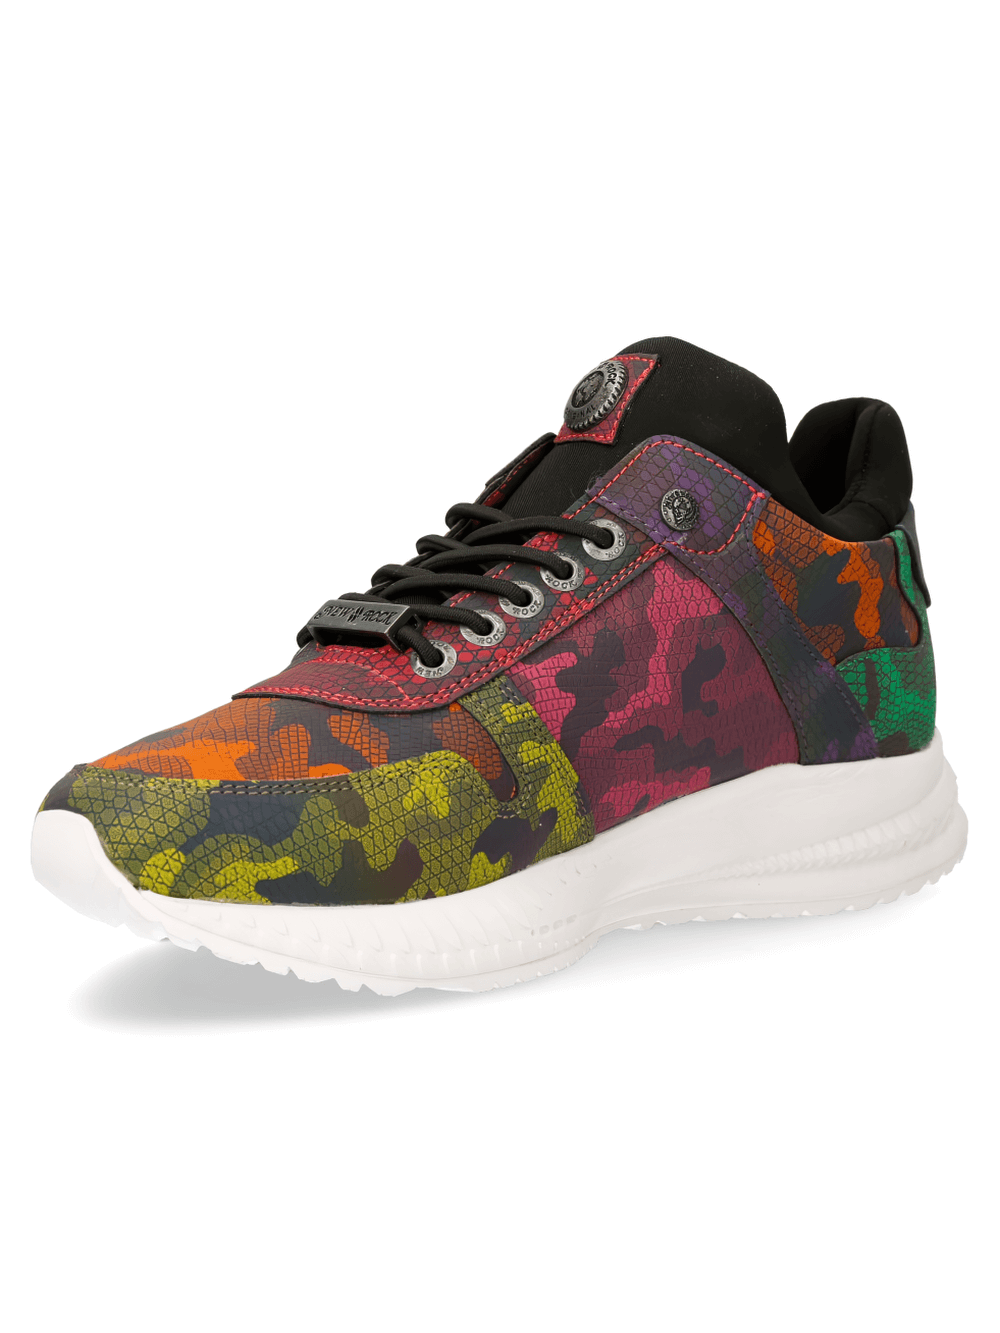 NEW ROCK Multicolor Camo Lace-Up Sports Sneakers